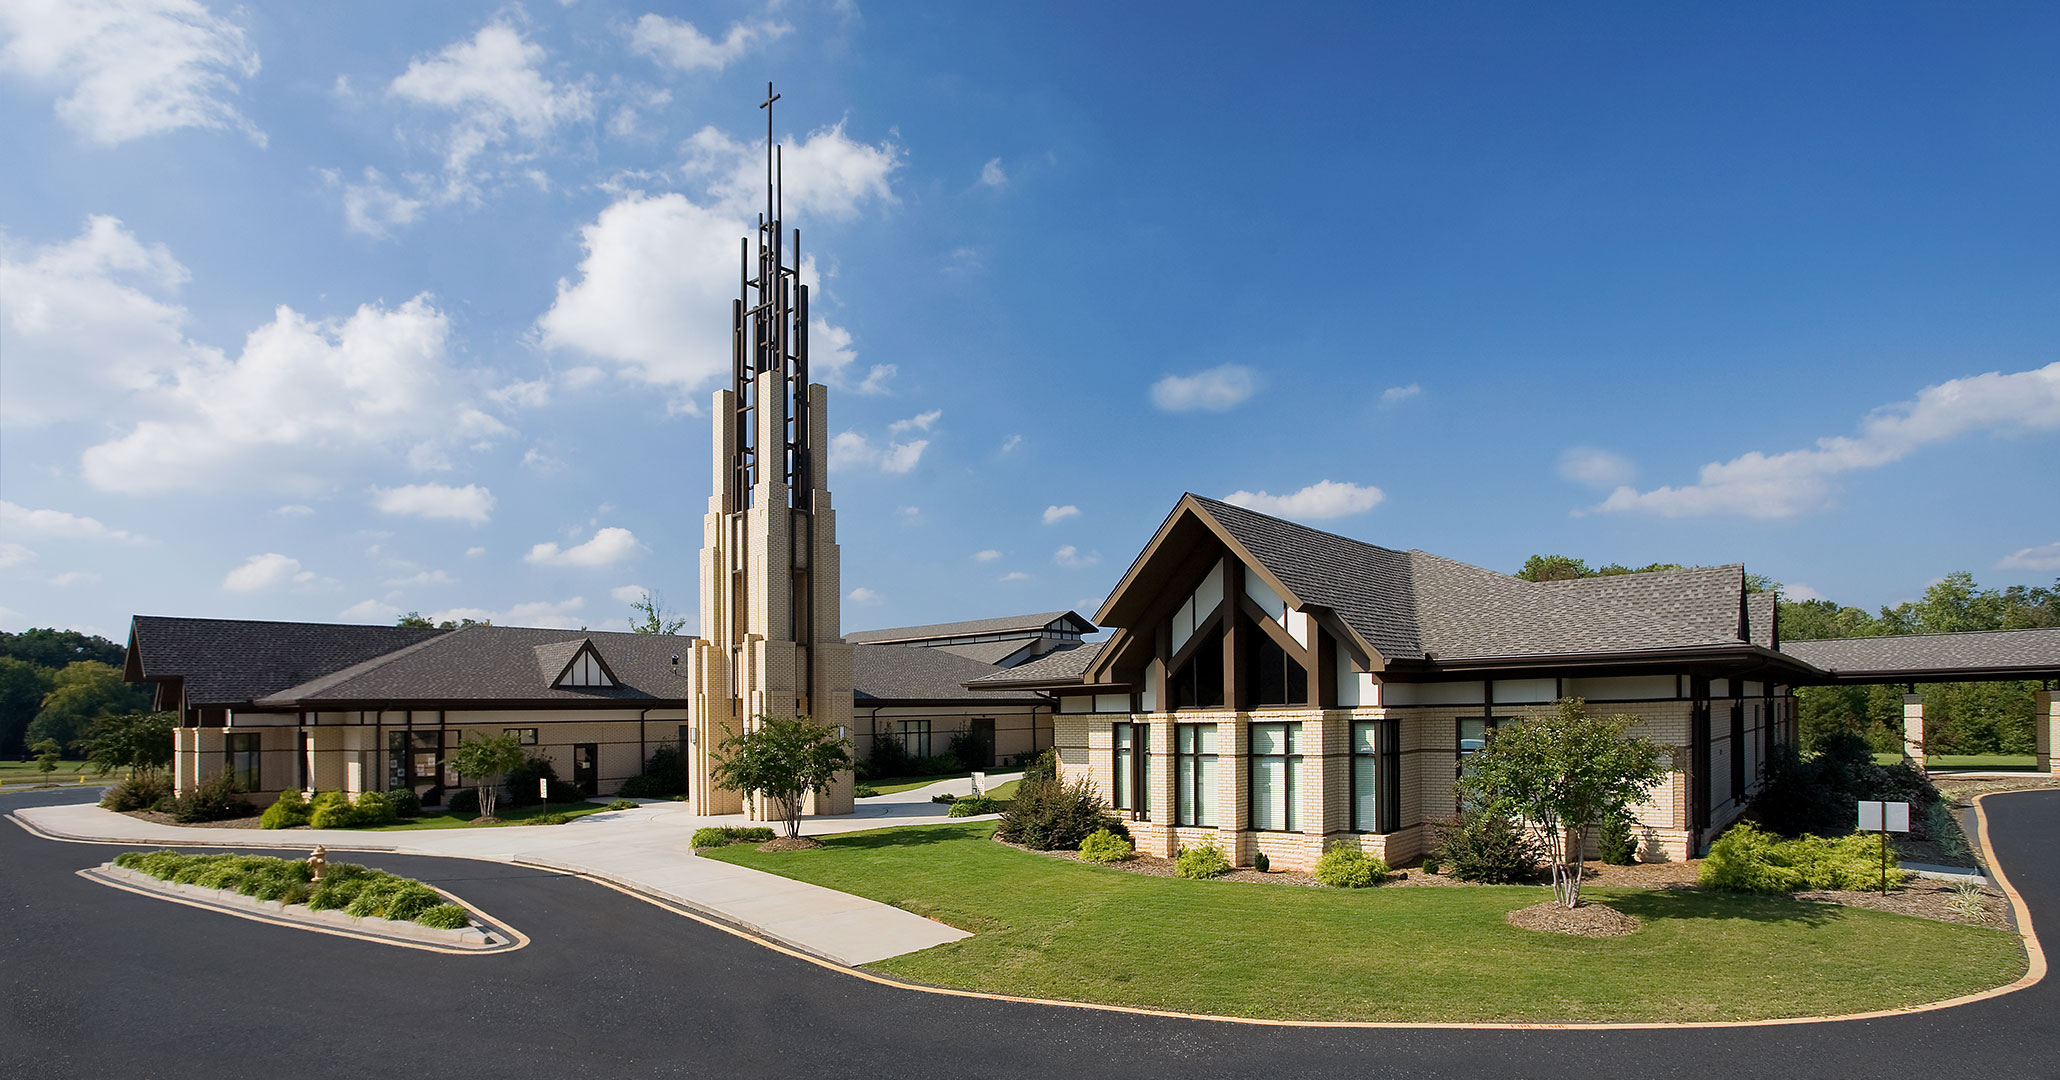 Boudreaux architects worked with the Clemson United Methodist Church to provide master planning services for their campus.